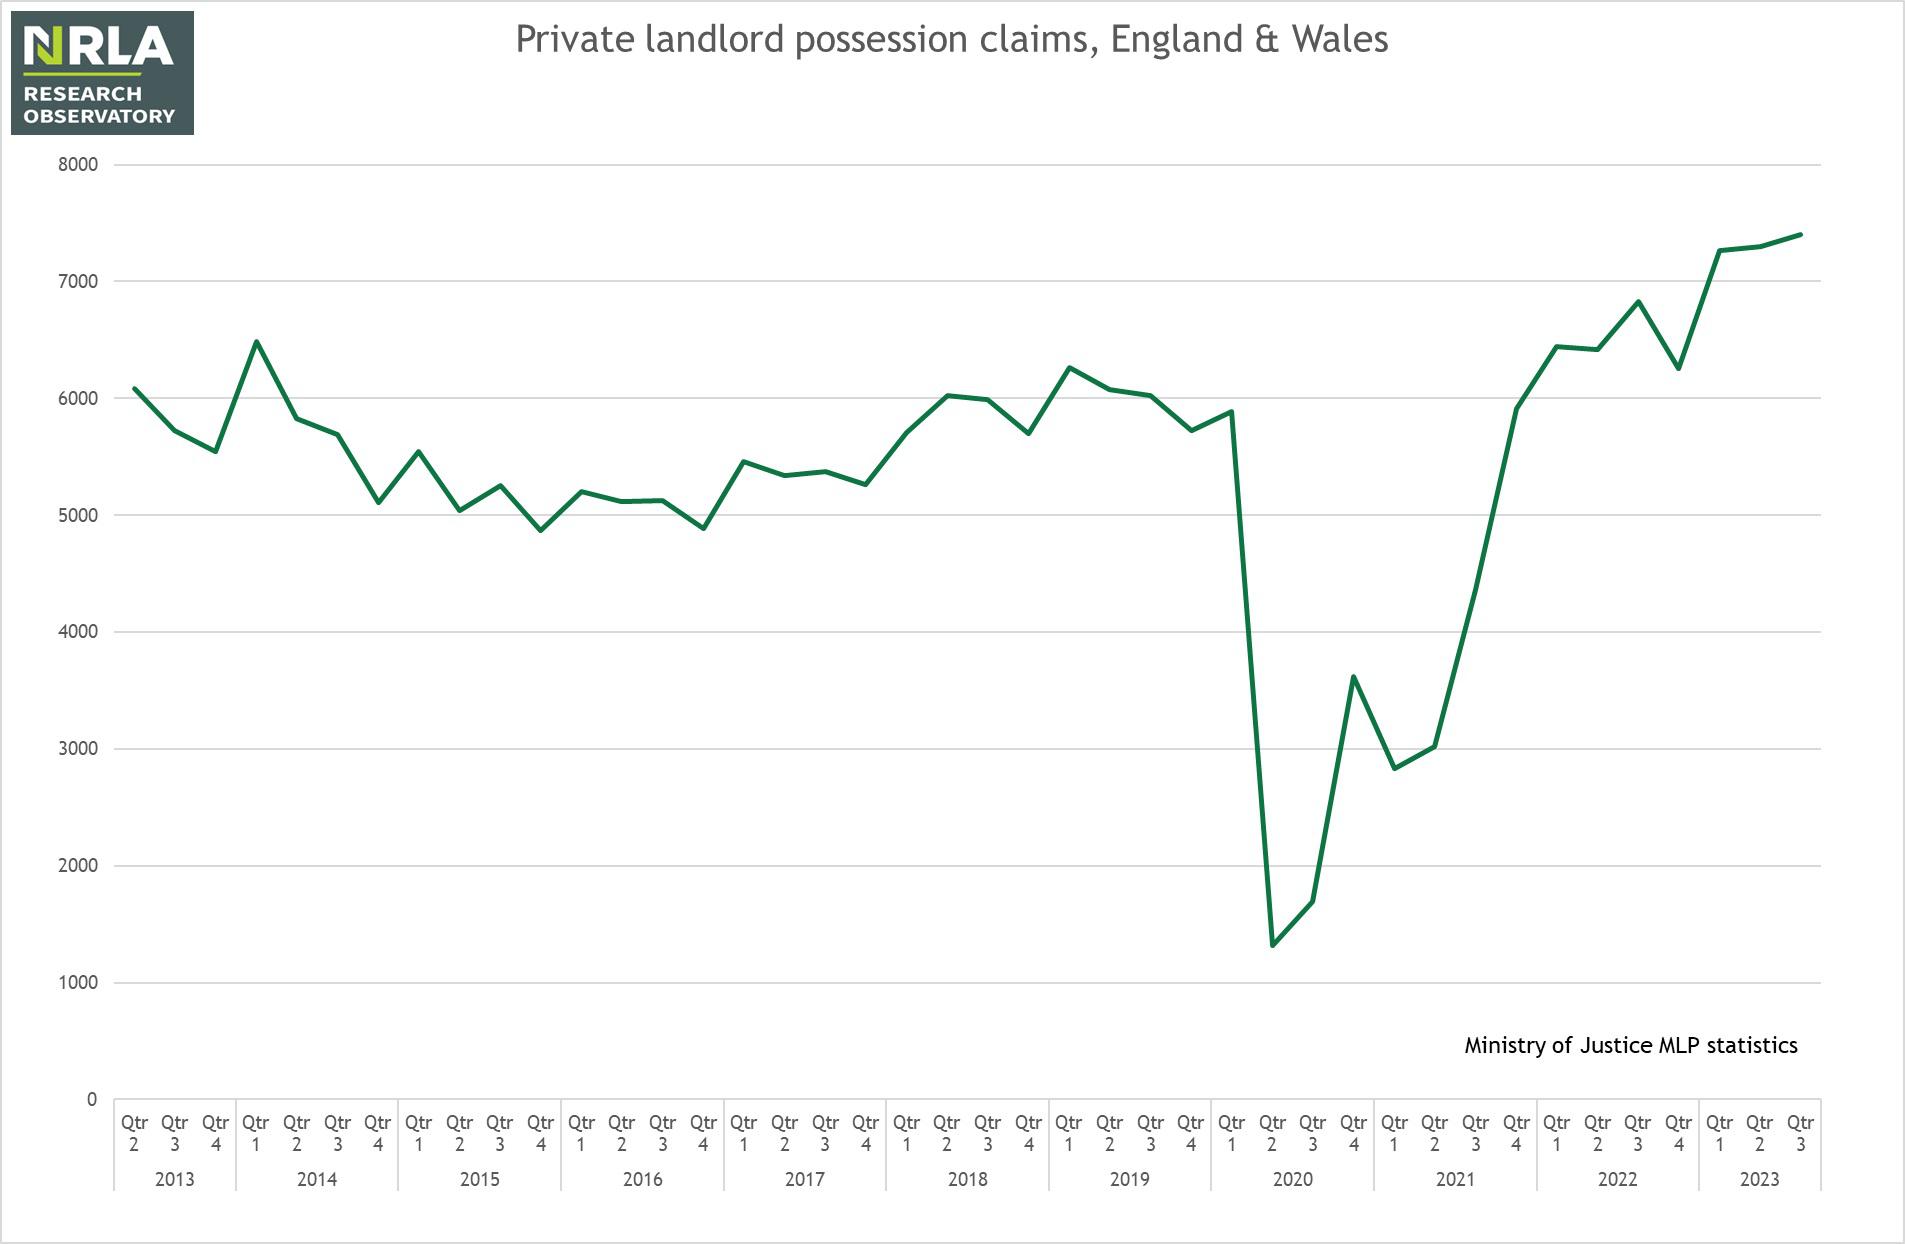 Quarterly possession claims - England & Wales